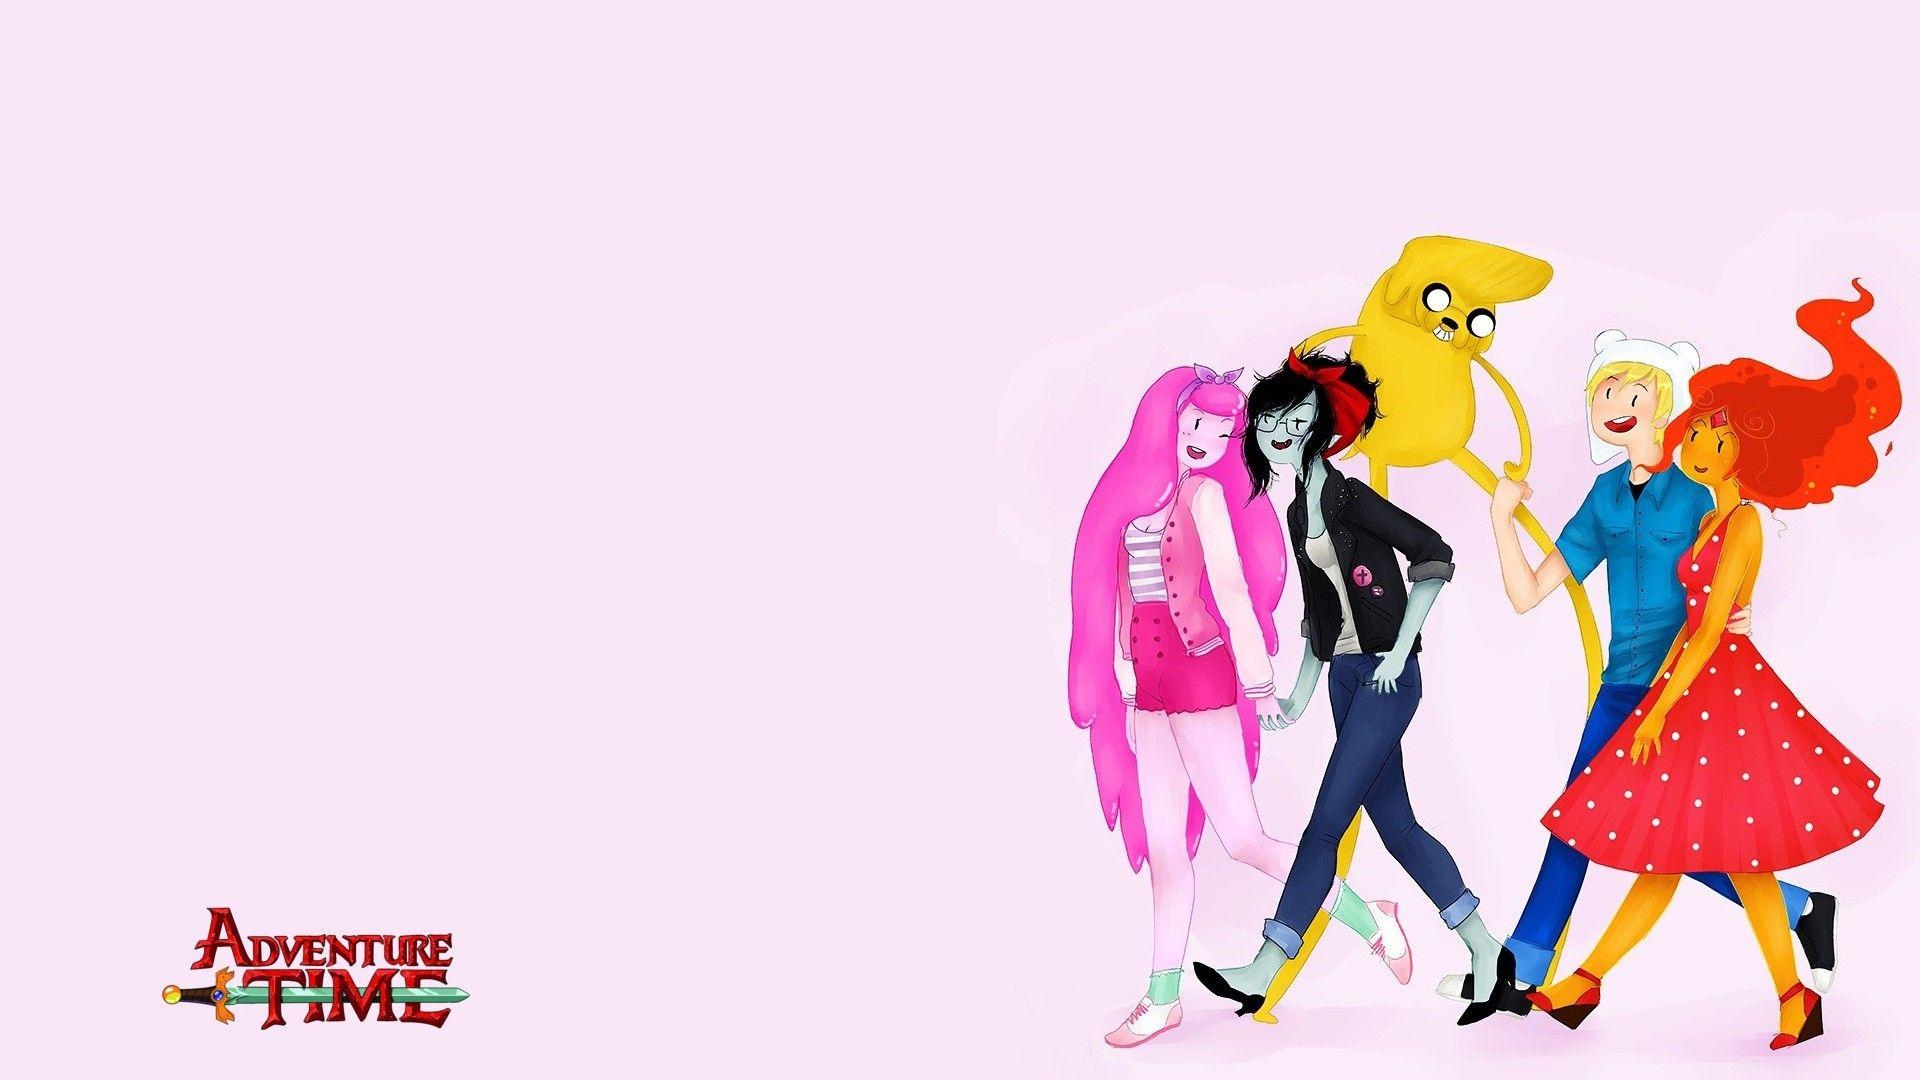 Adventure Time, Jake the Dog, Marceline the Vampire Queen